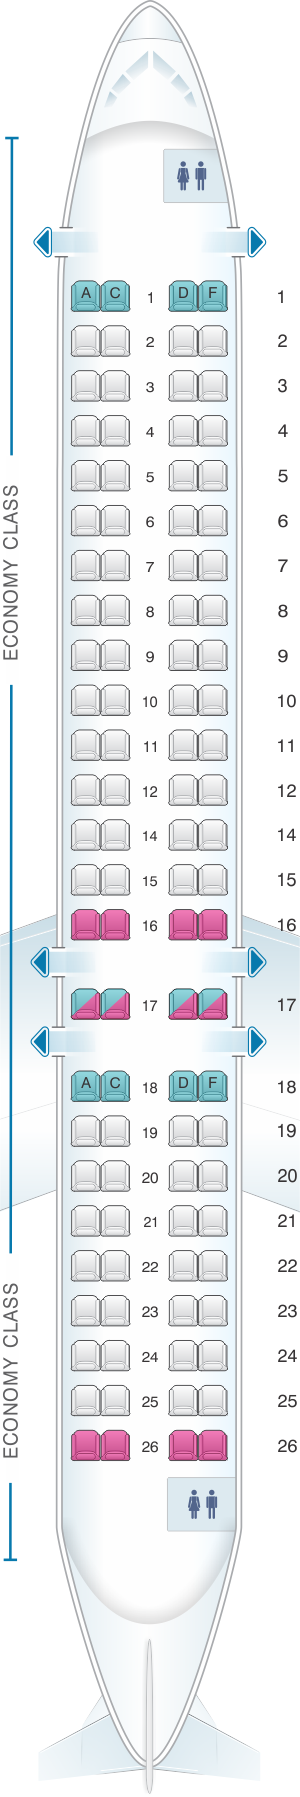 Seat map for HOP! CRJ 1000